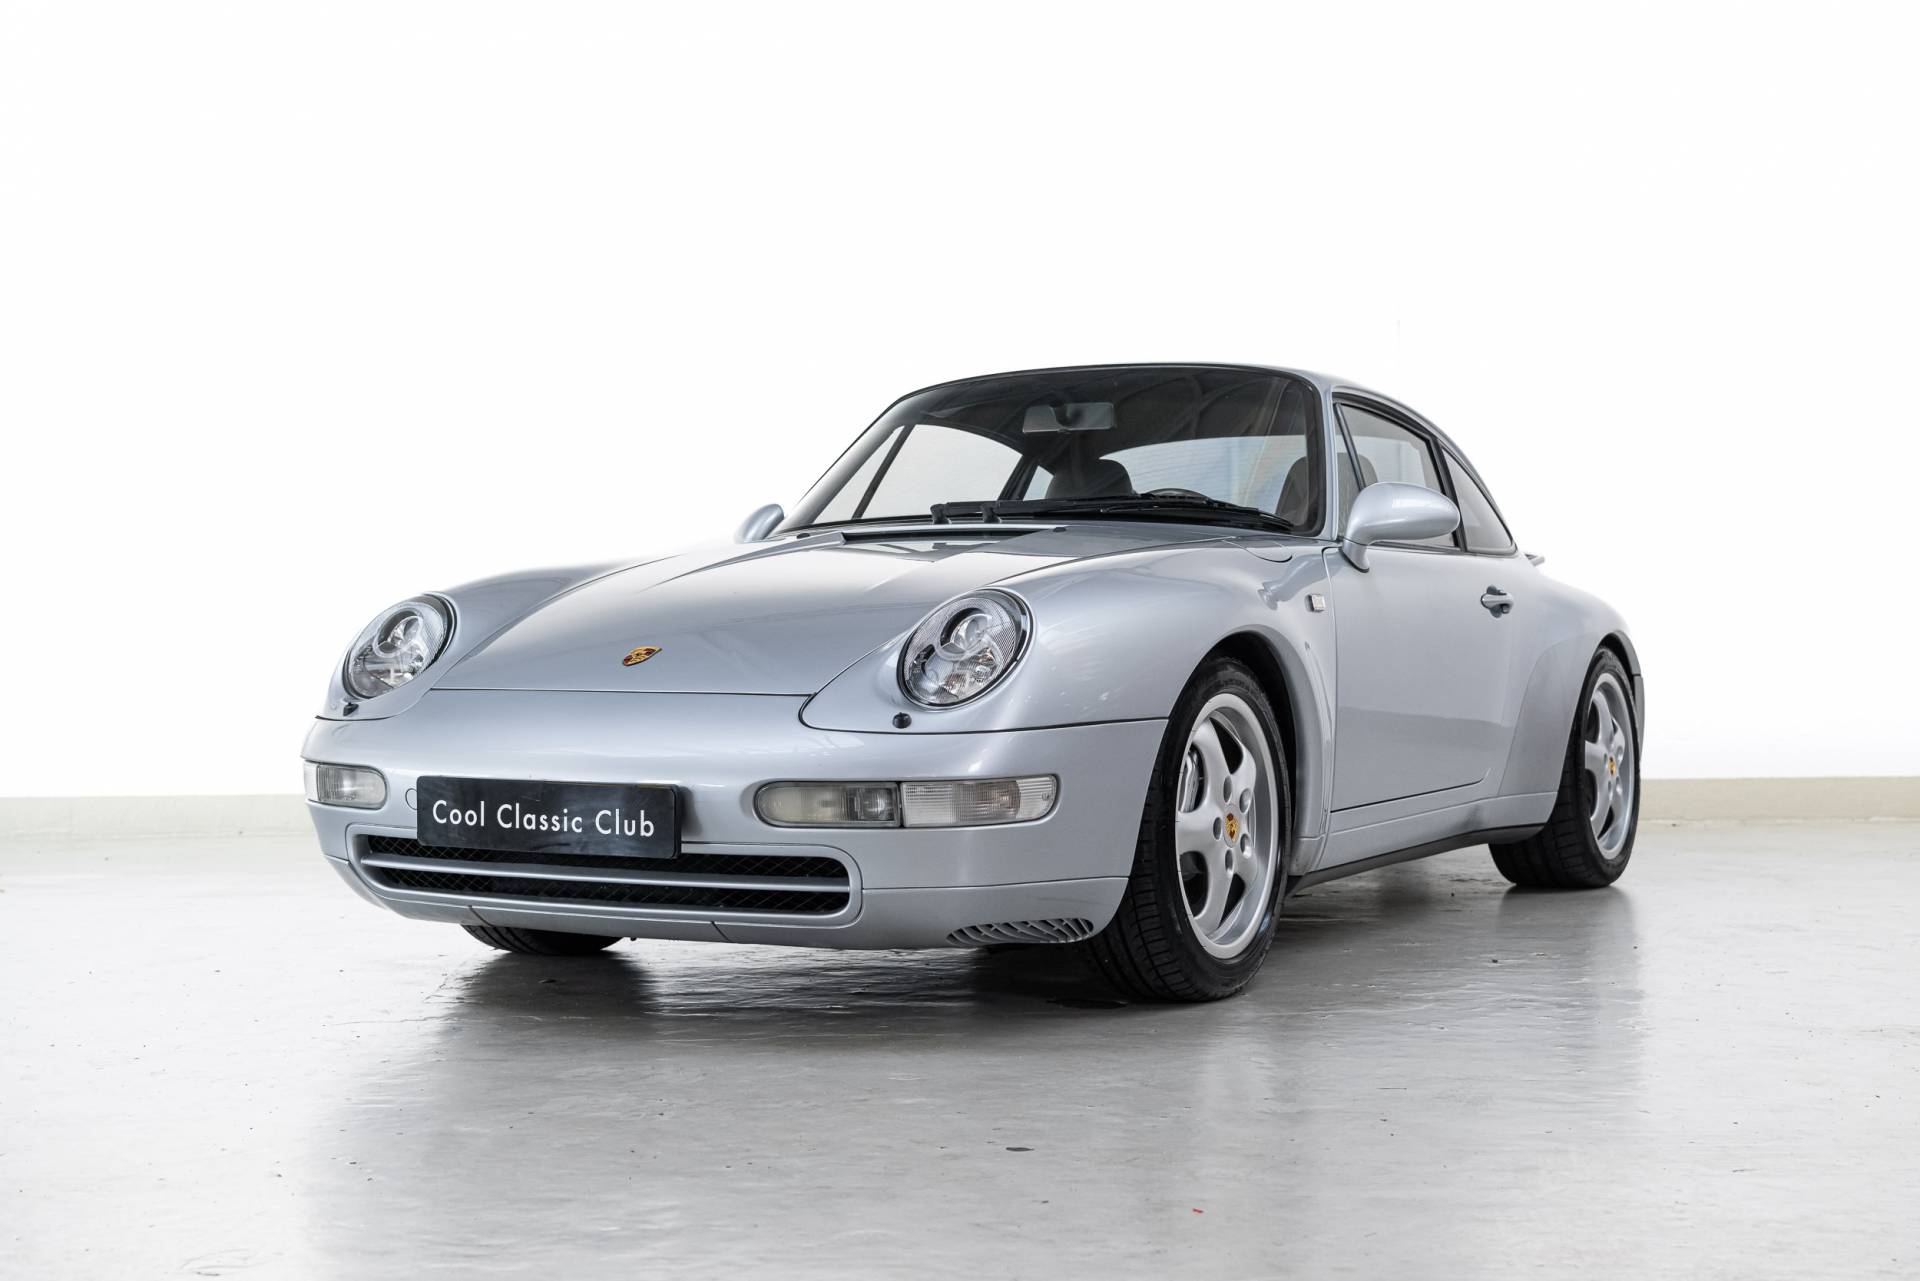 For Sale: Porsche 911 Carrera 4 (1996) offered for GBP 92,069